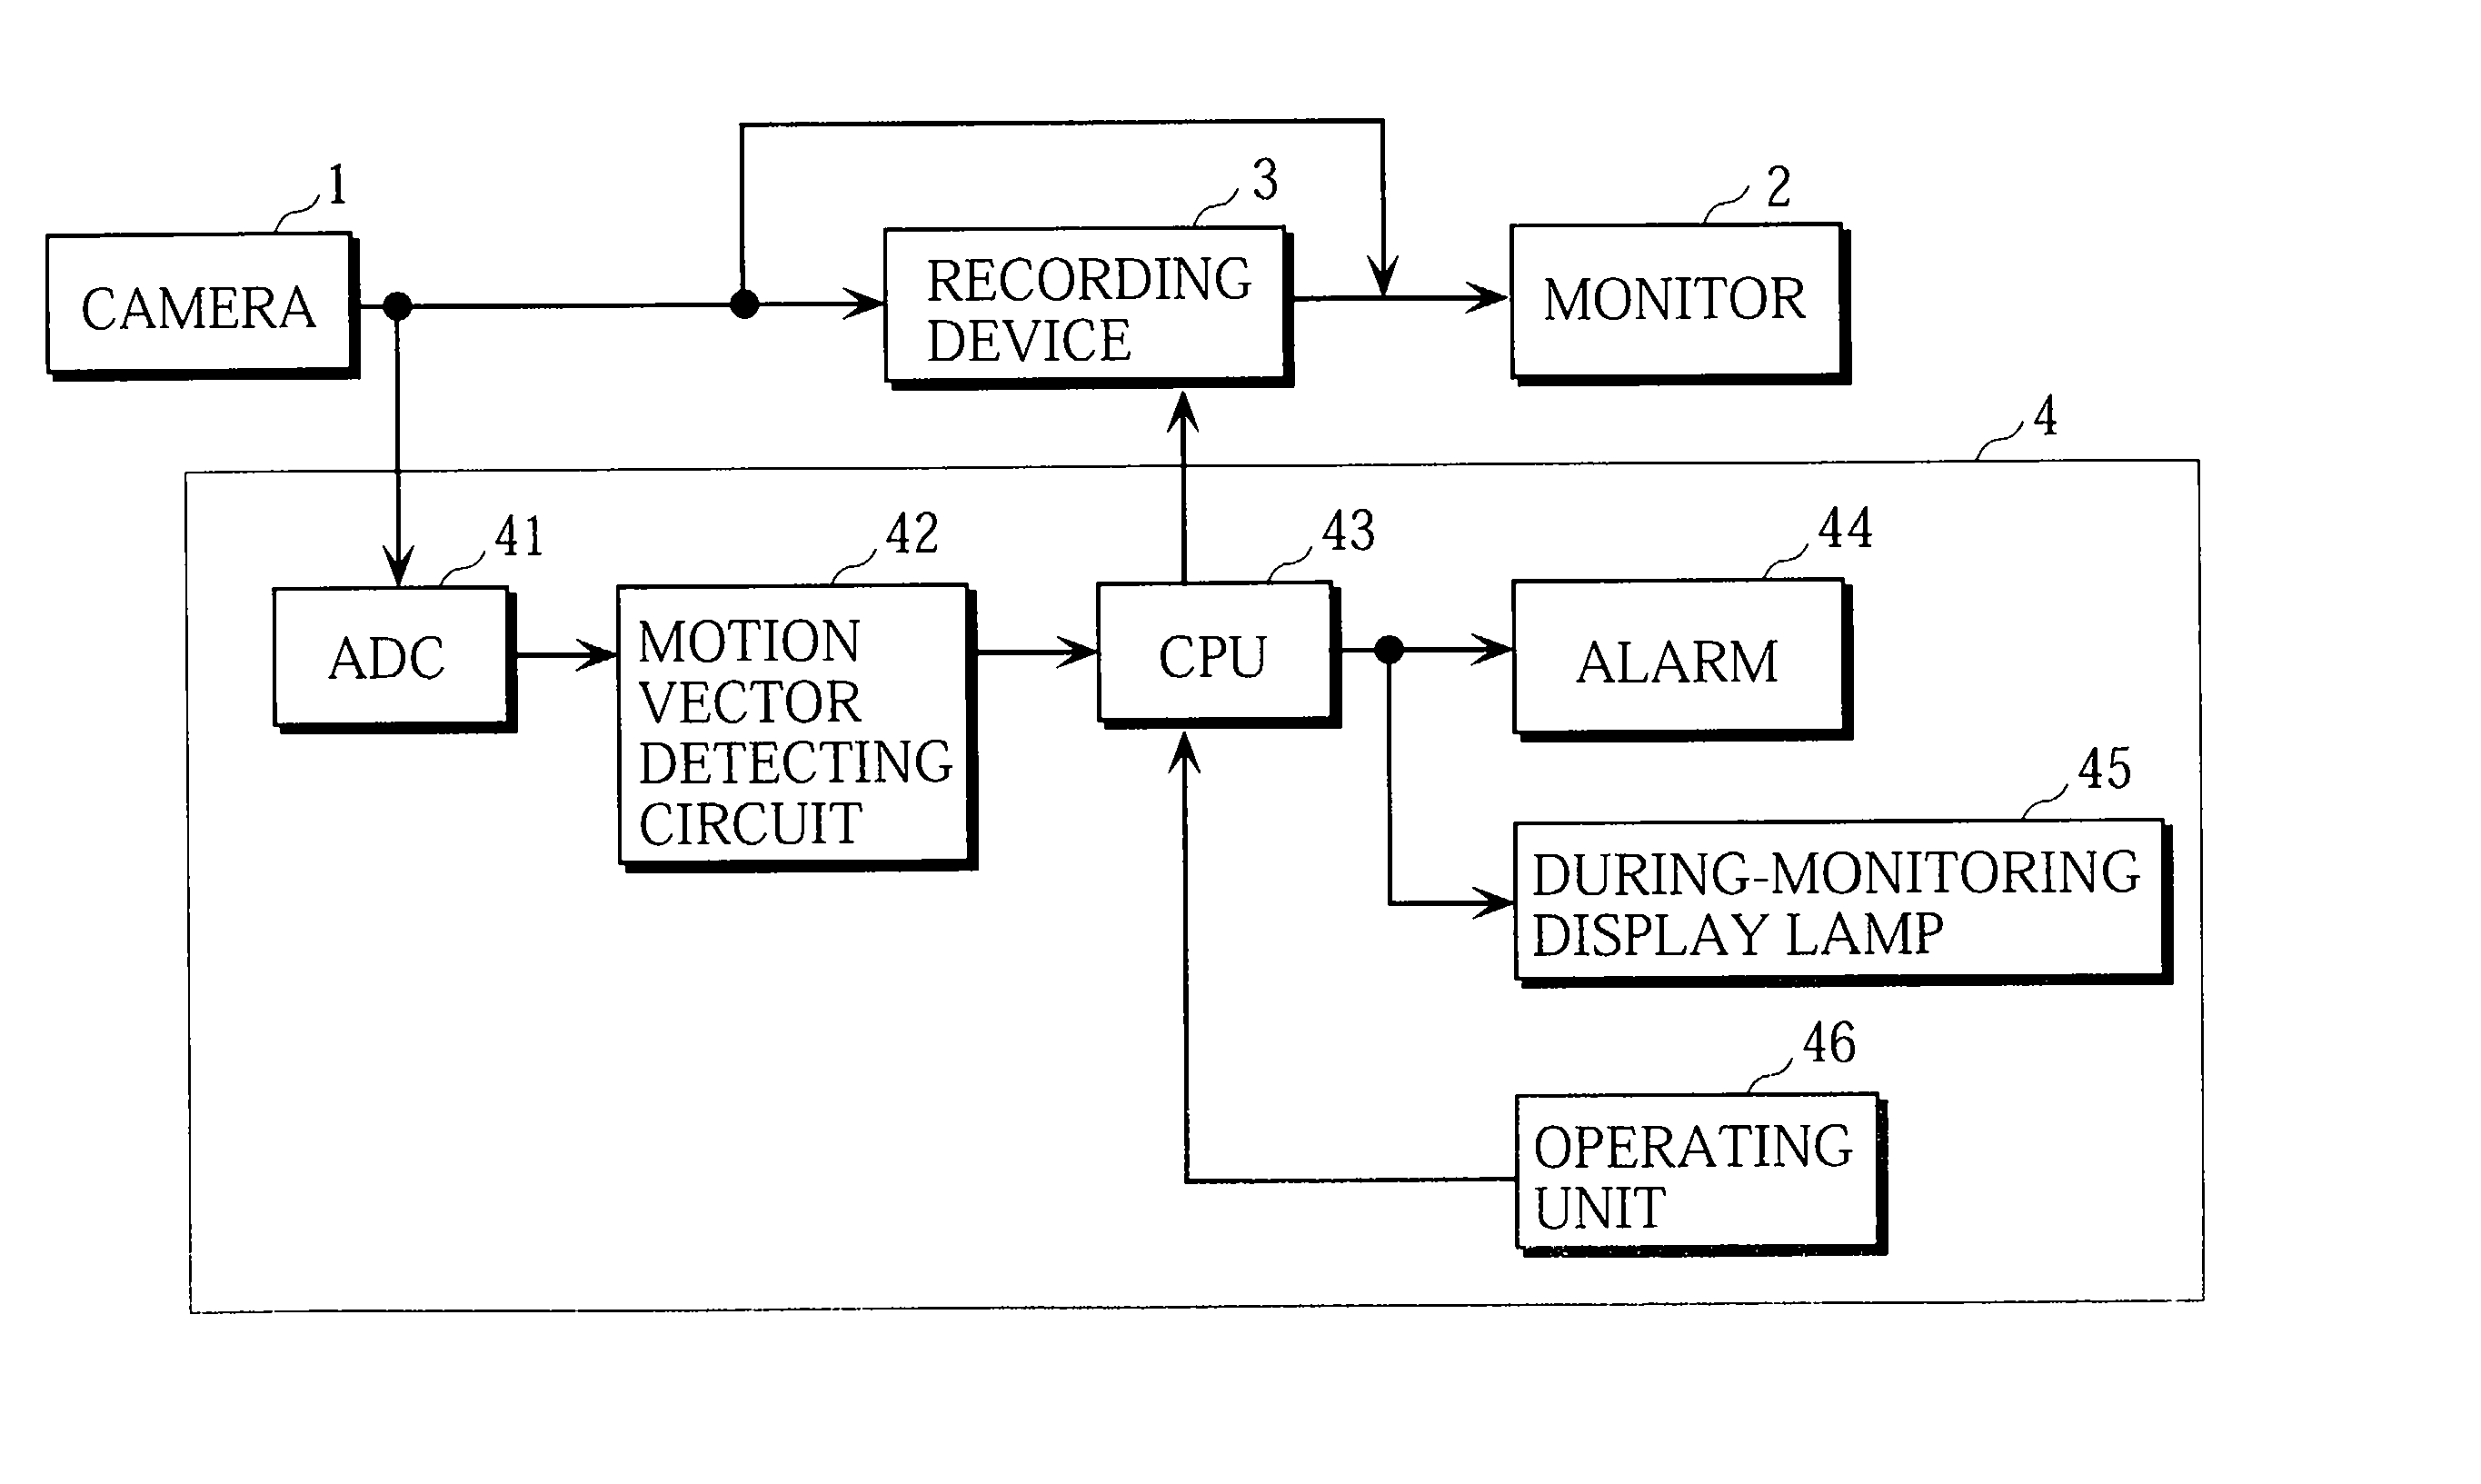 Monitoring system and imaging system